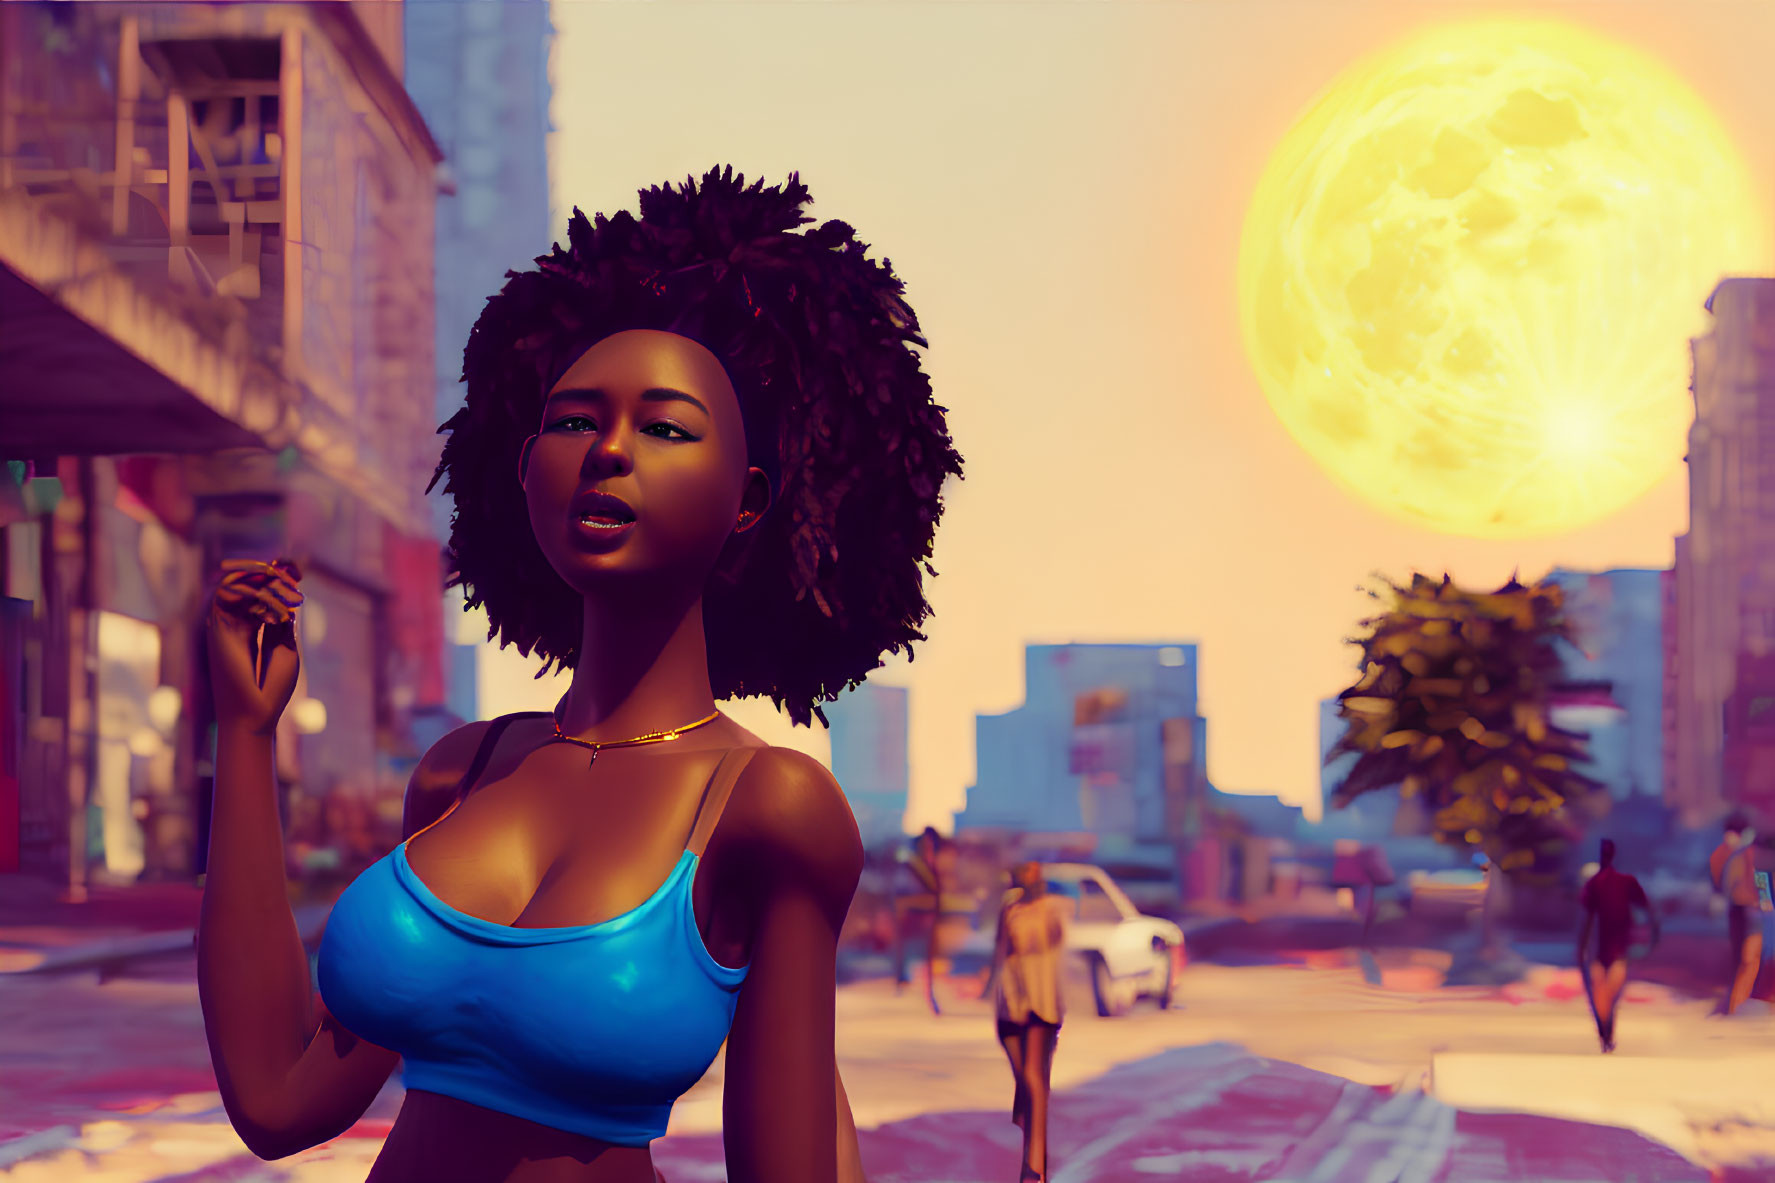 Stylized image of woman with afro and cityscape background